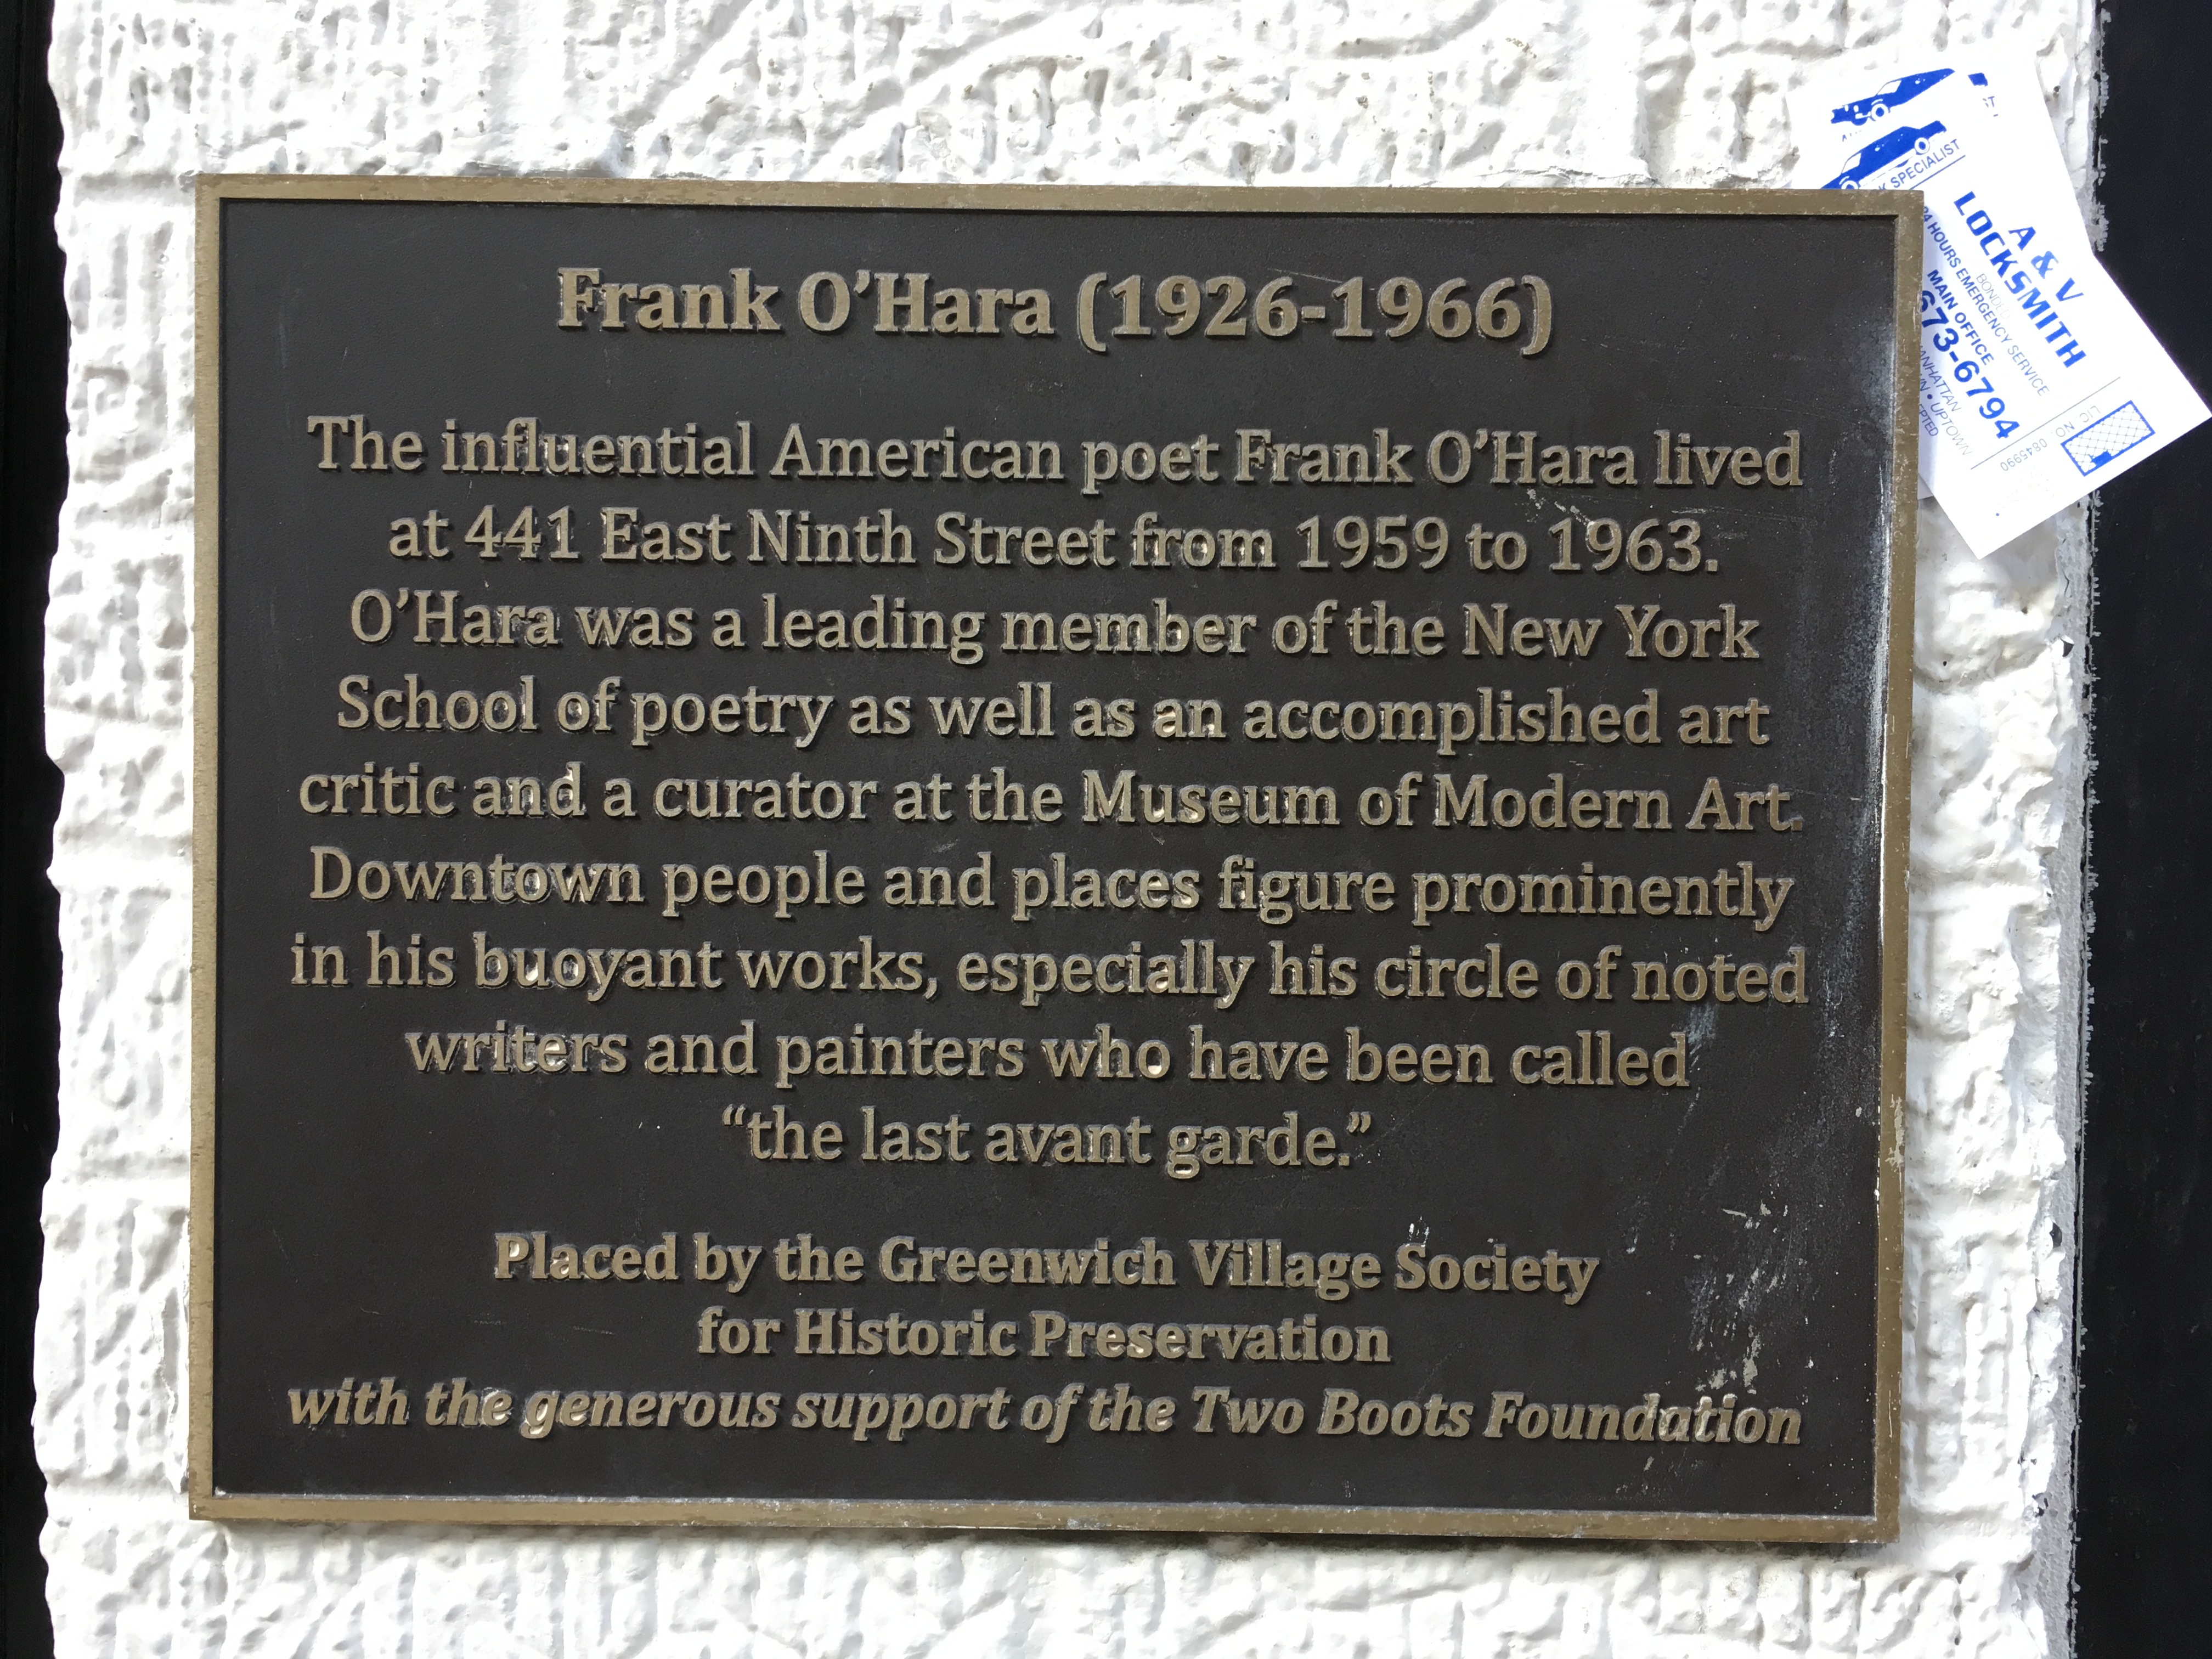 Plaque at Frank O'Hara's old apartment at 441 East 9th Street